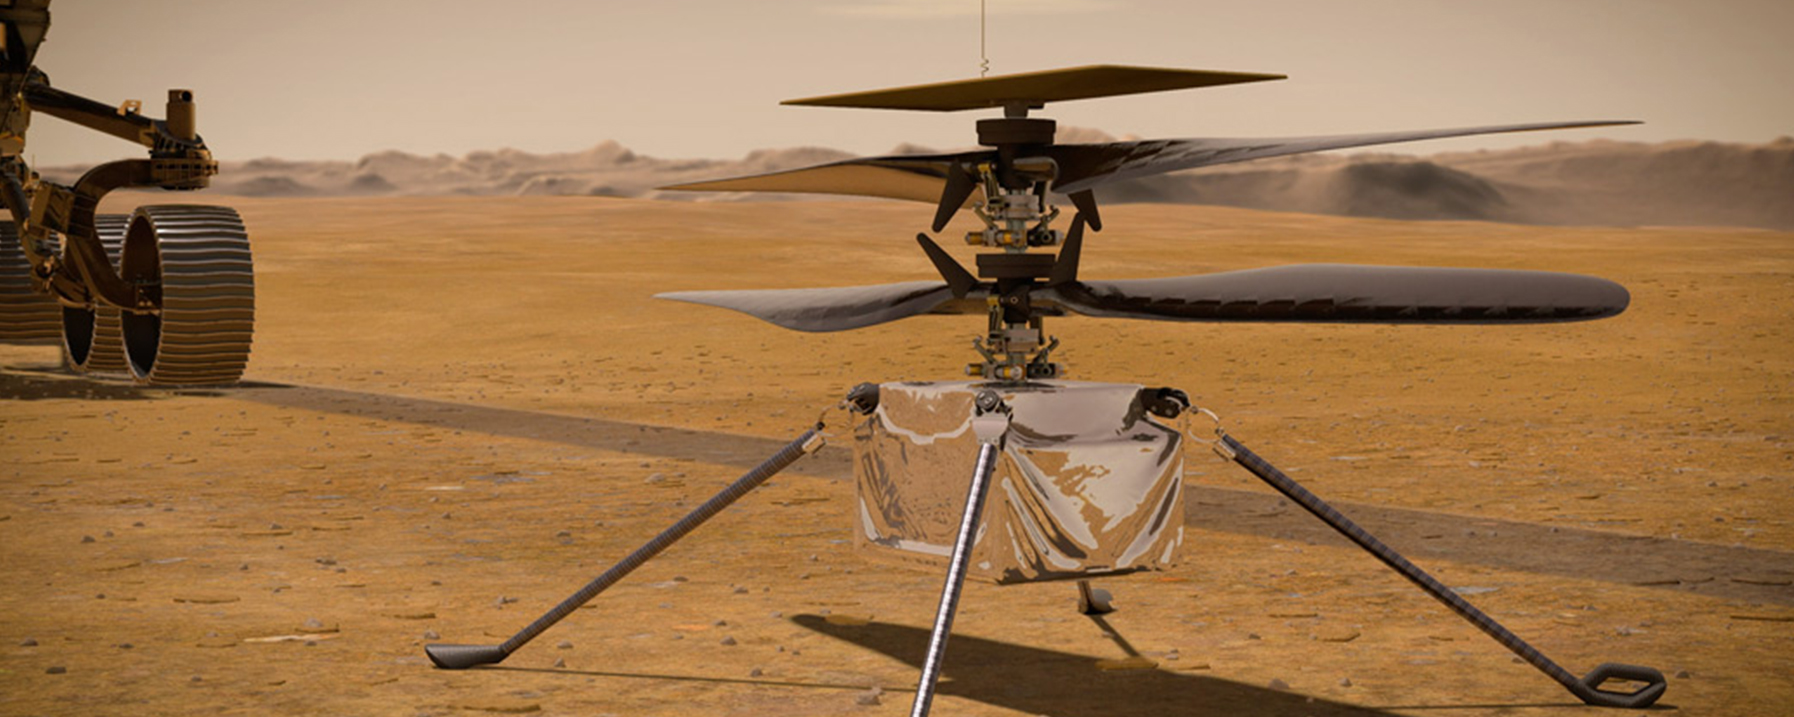 Mars helicopter graphic for #ICYMI July 17, 2020